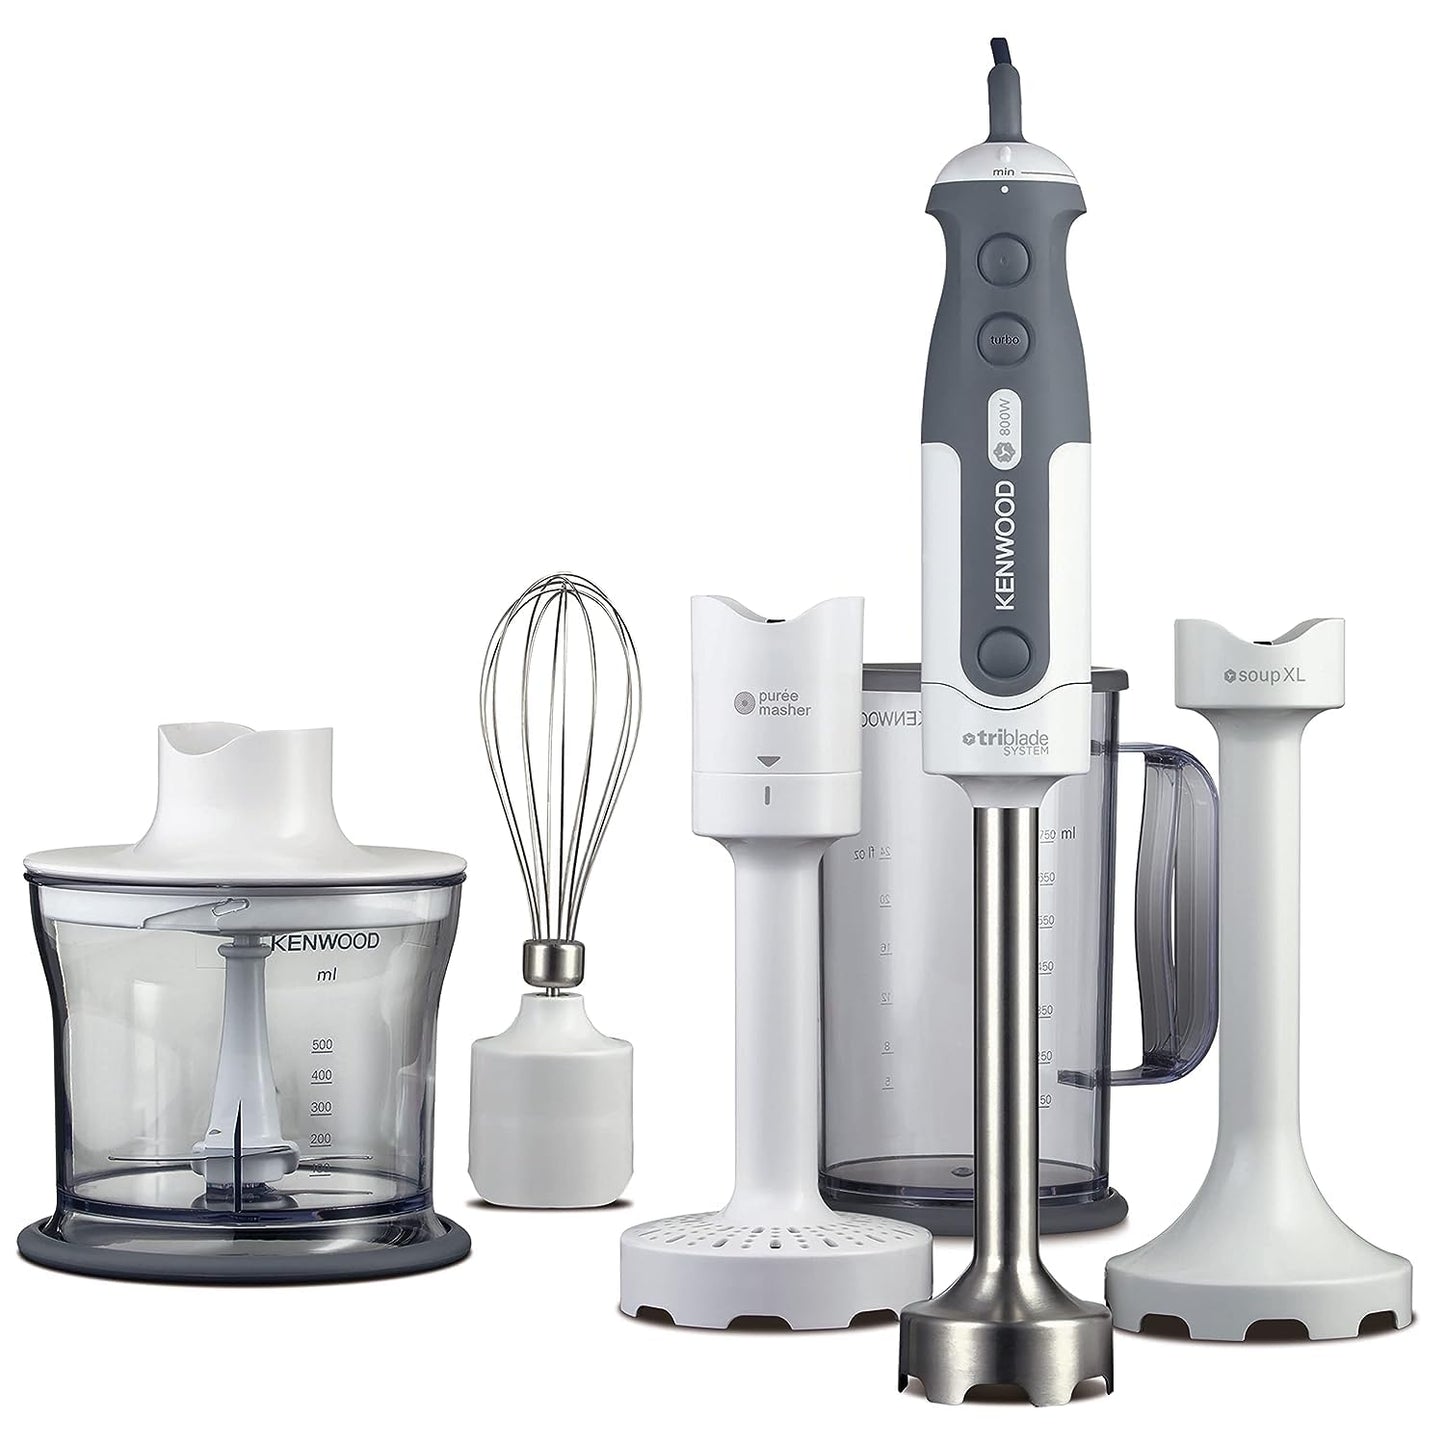 Kenwood Hand Blender 800W With 500Ml Chopper, 750Ml Beaker, Whisk, Puree/Masher, Soup XL, Stainless Steel Wand, Triblade Technology Hdp406Wh White/Grey